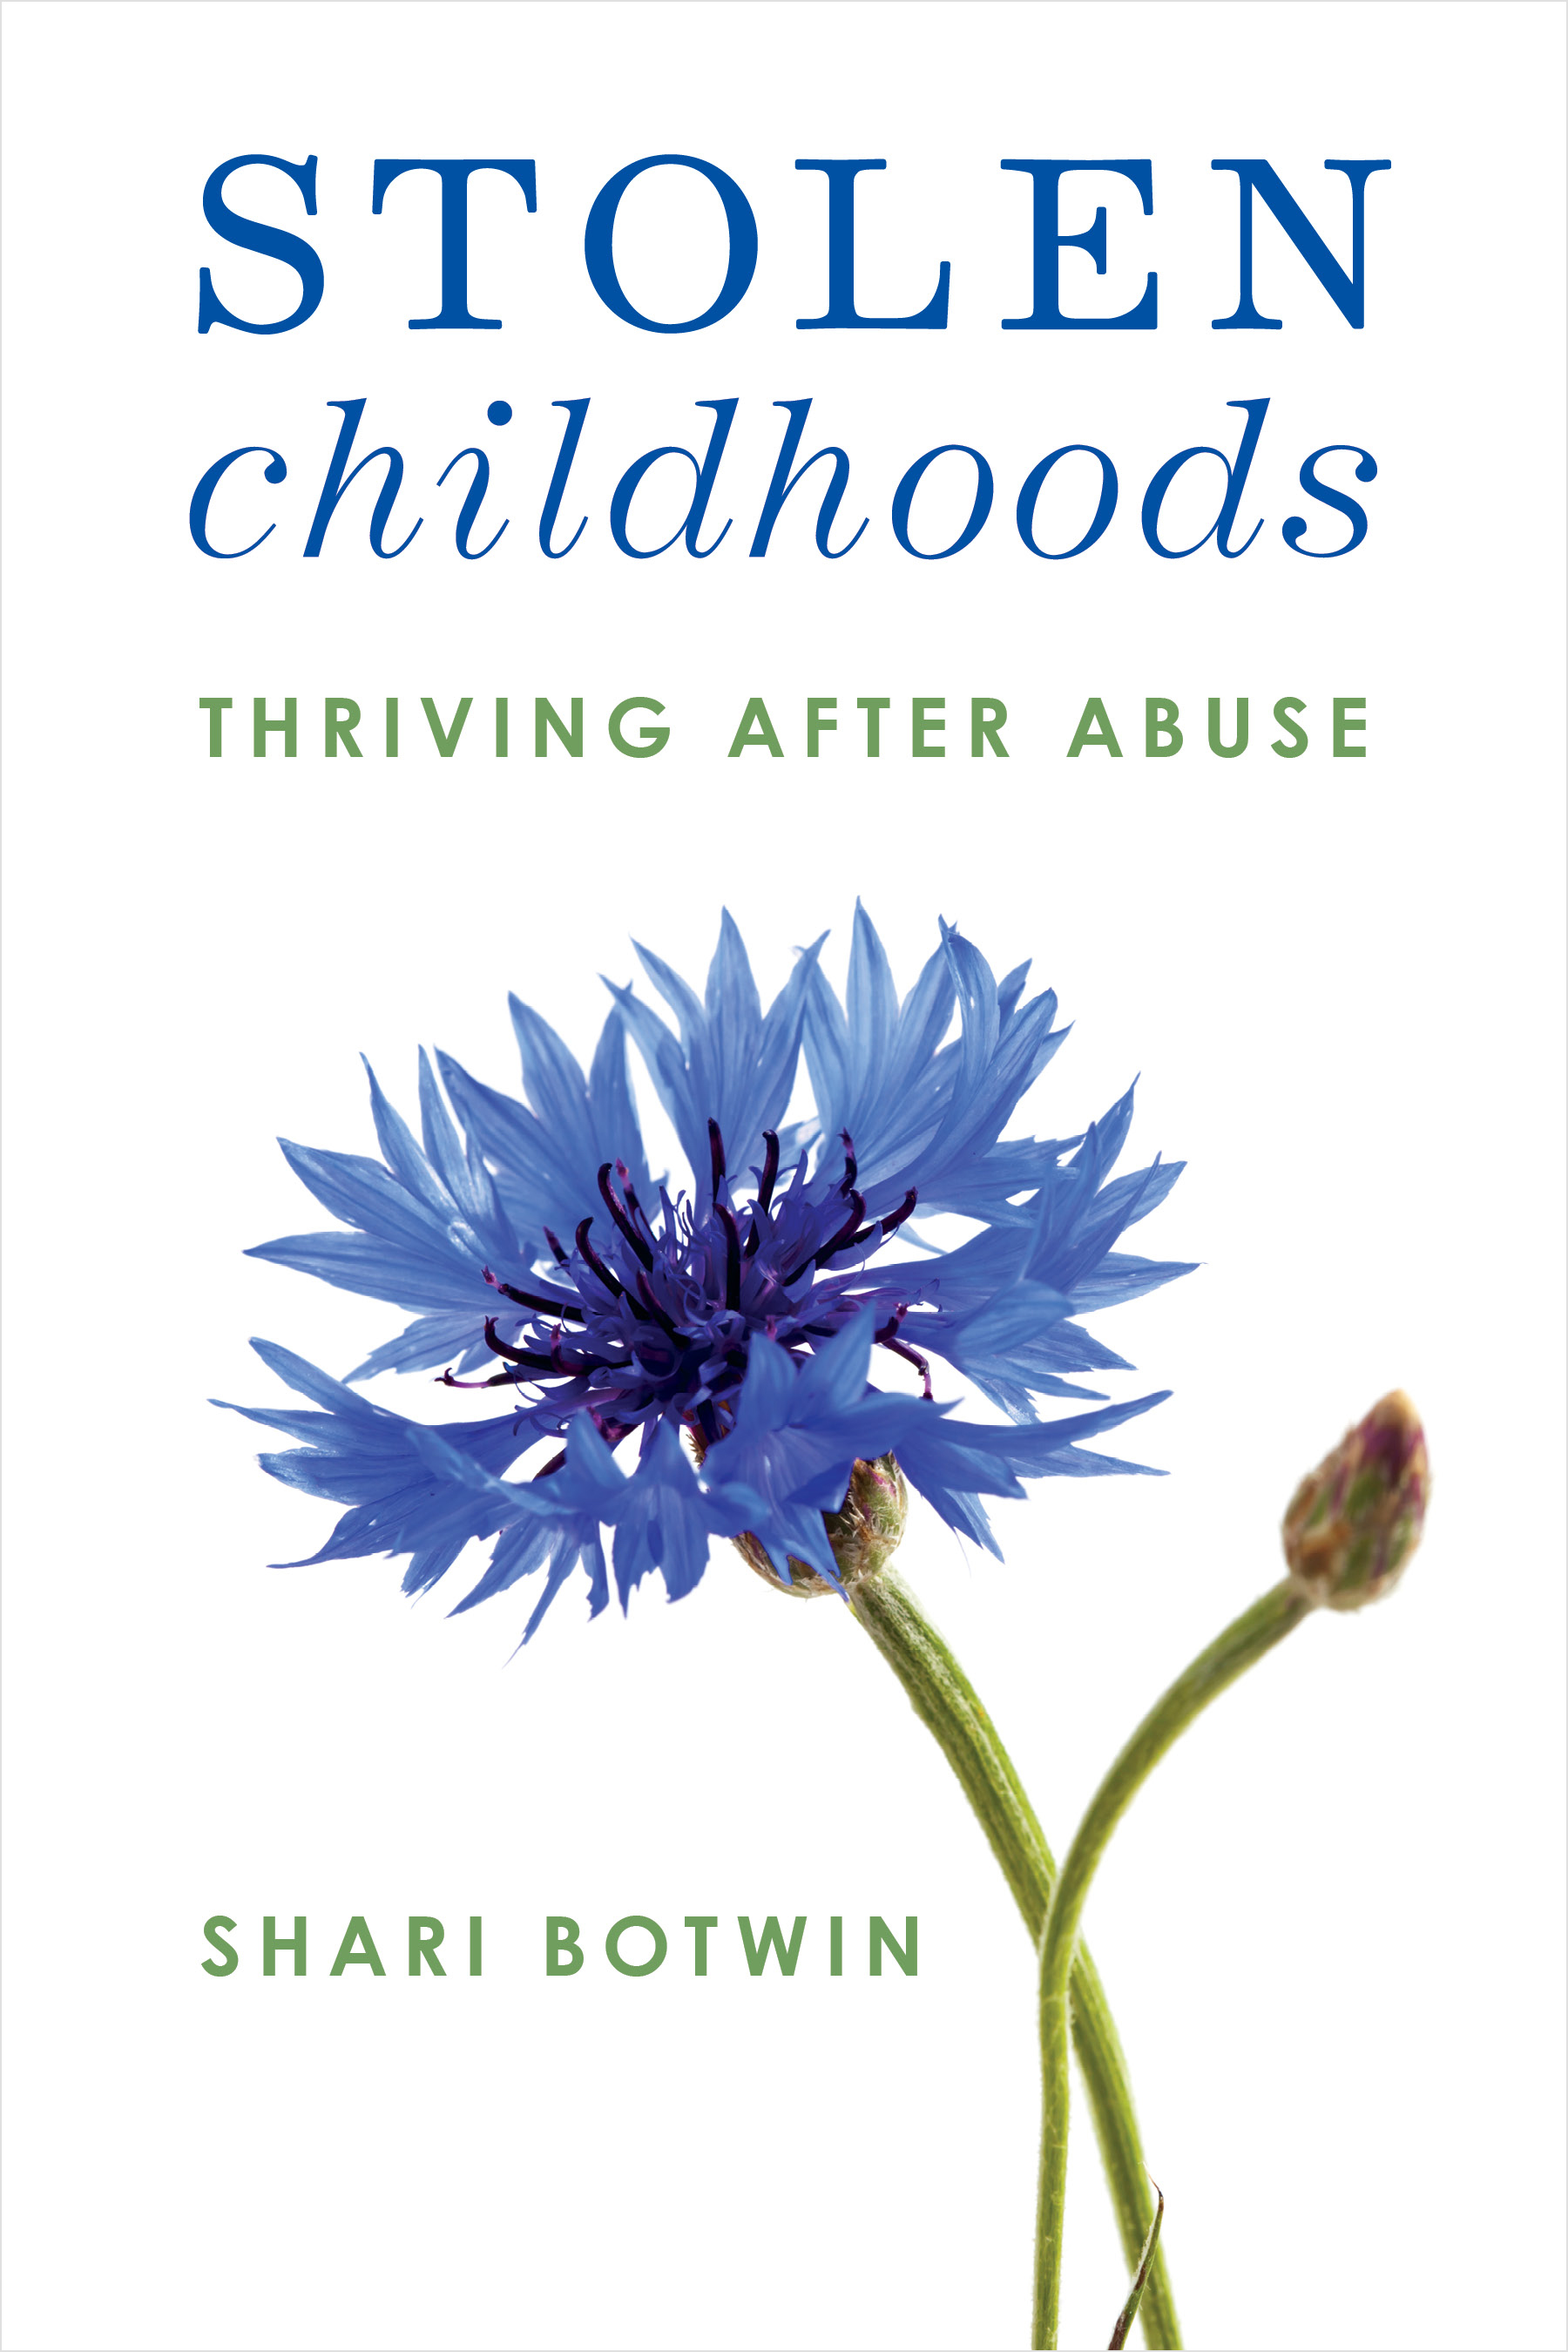 Stolen Childhoods: Thriving After Abuse